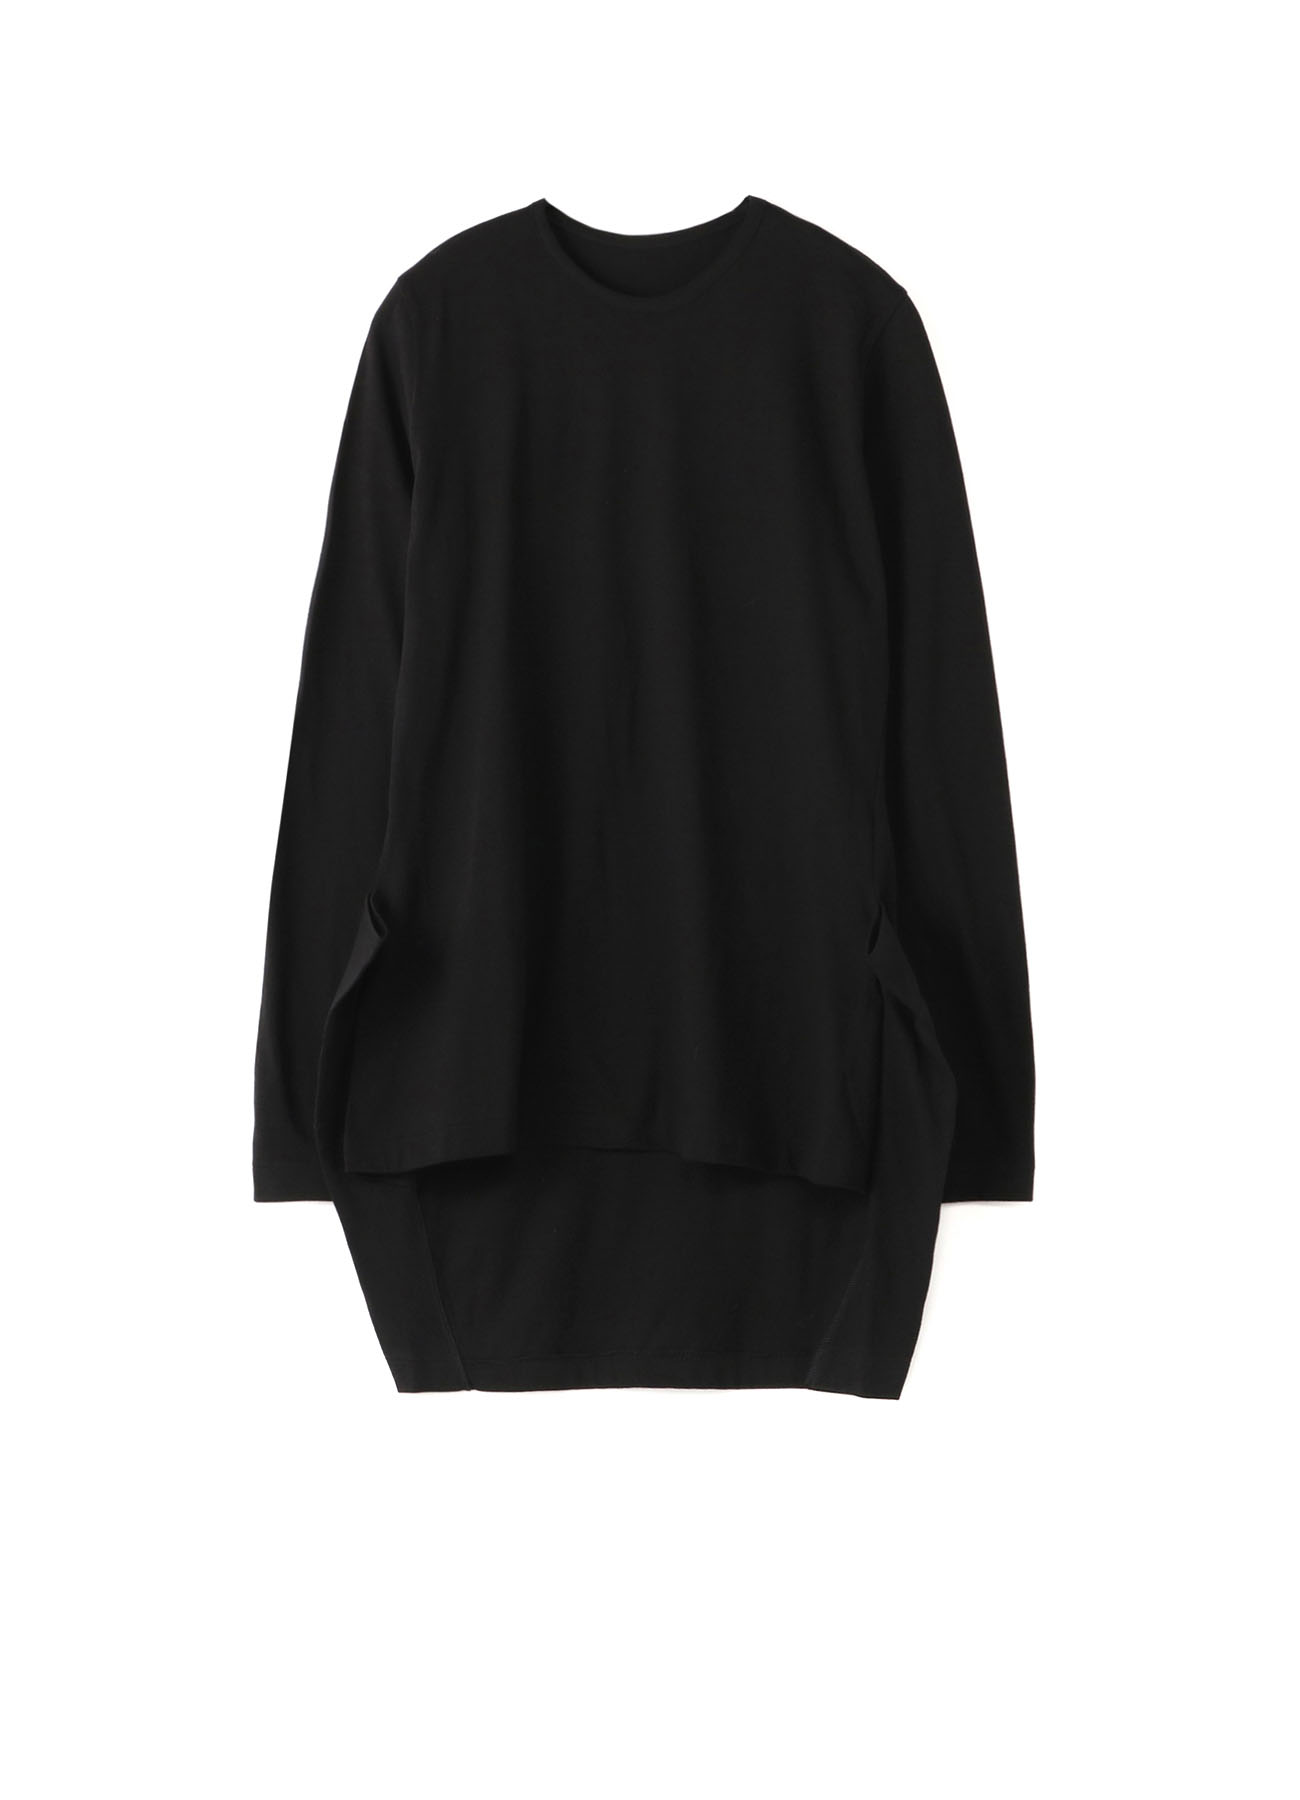 ROUND NECK LONG SLEEVES